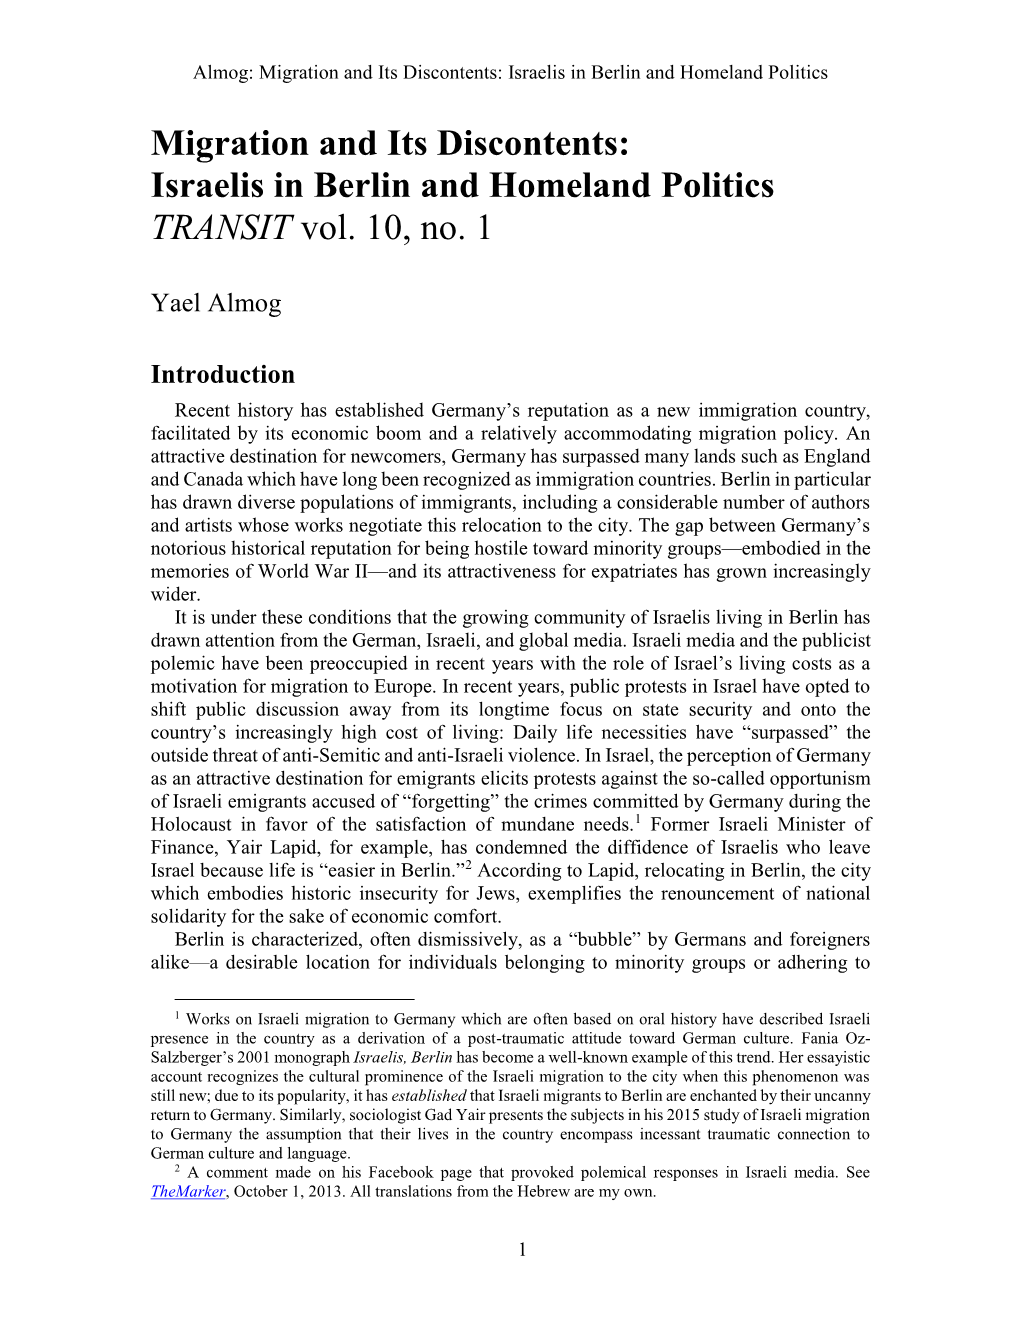 Migration and Its Discontents: Israelis in Berlin and Homeland Politics